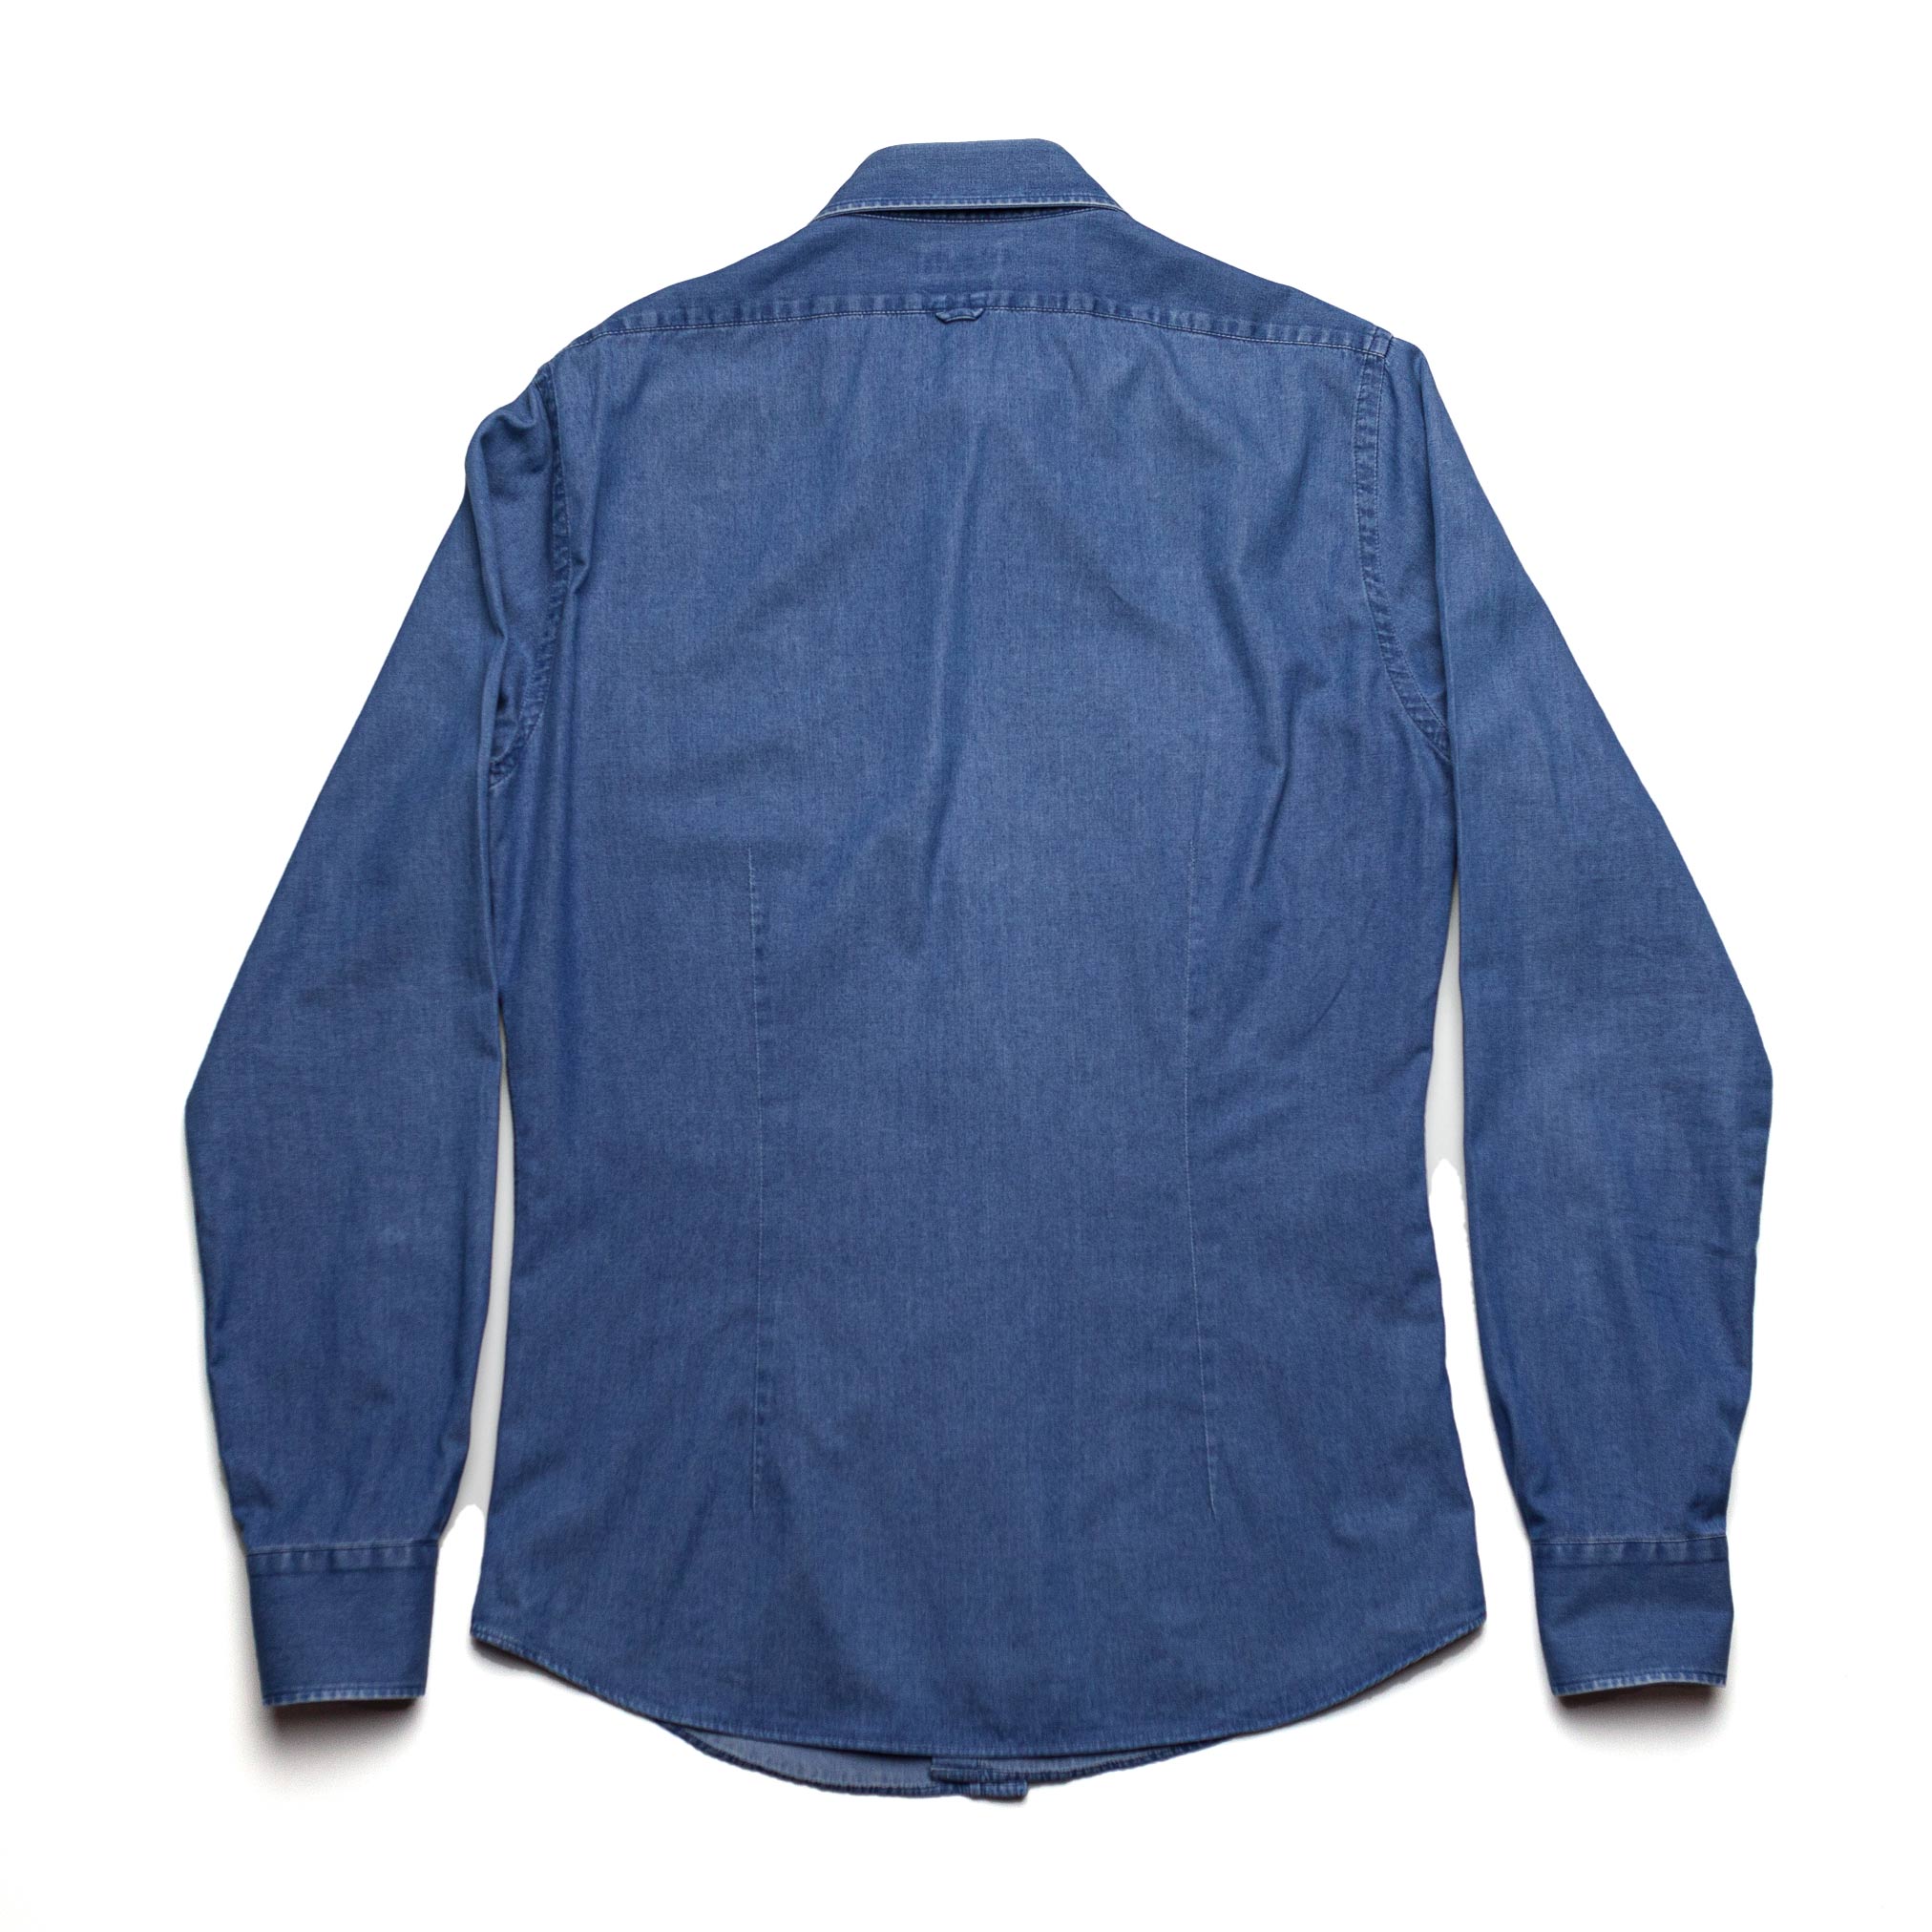 Cotton Shirt in Blue - S